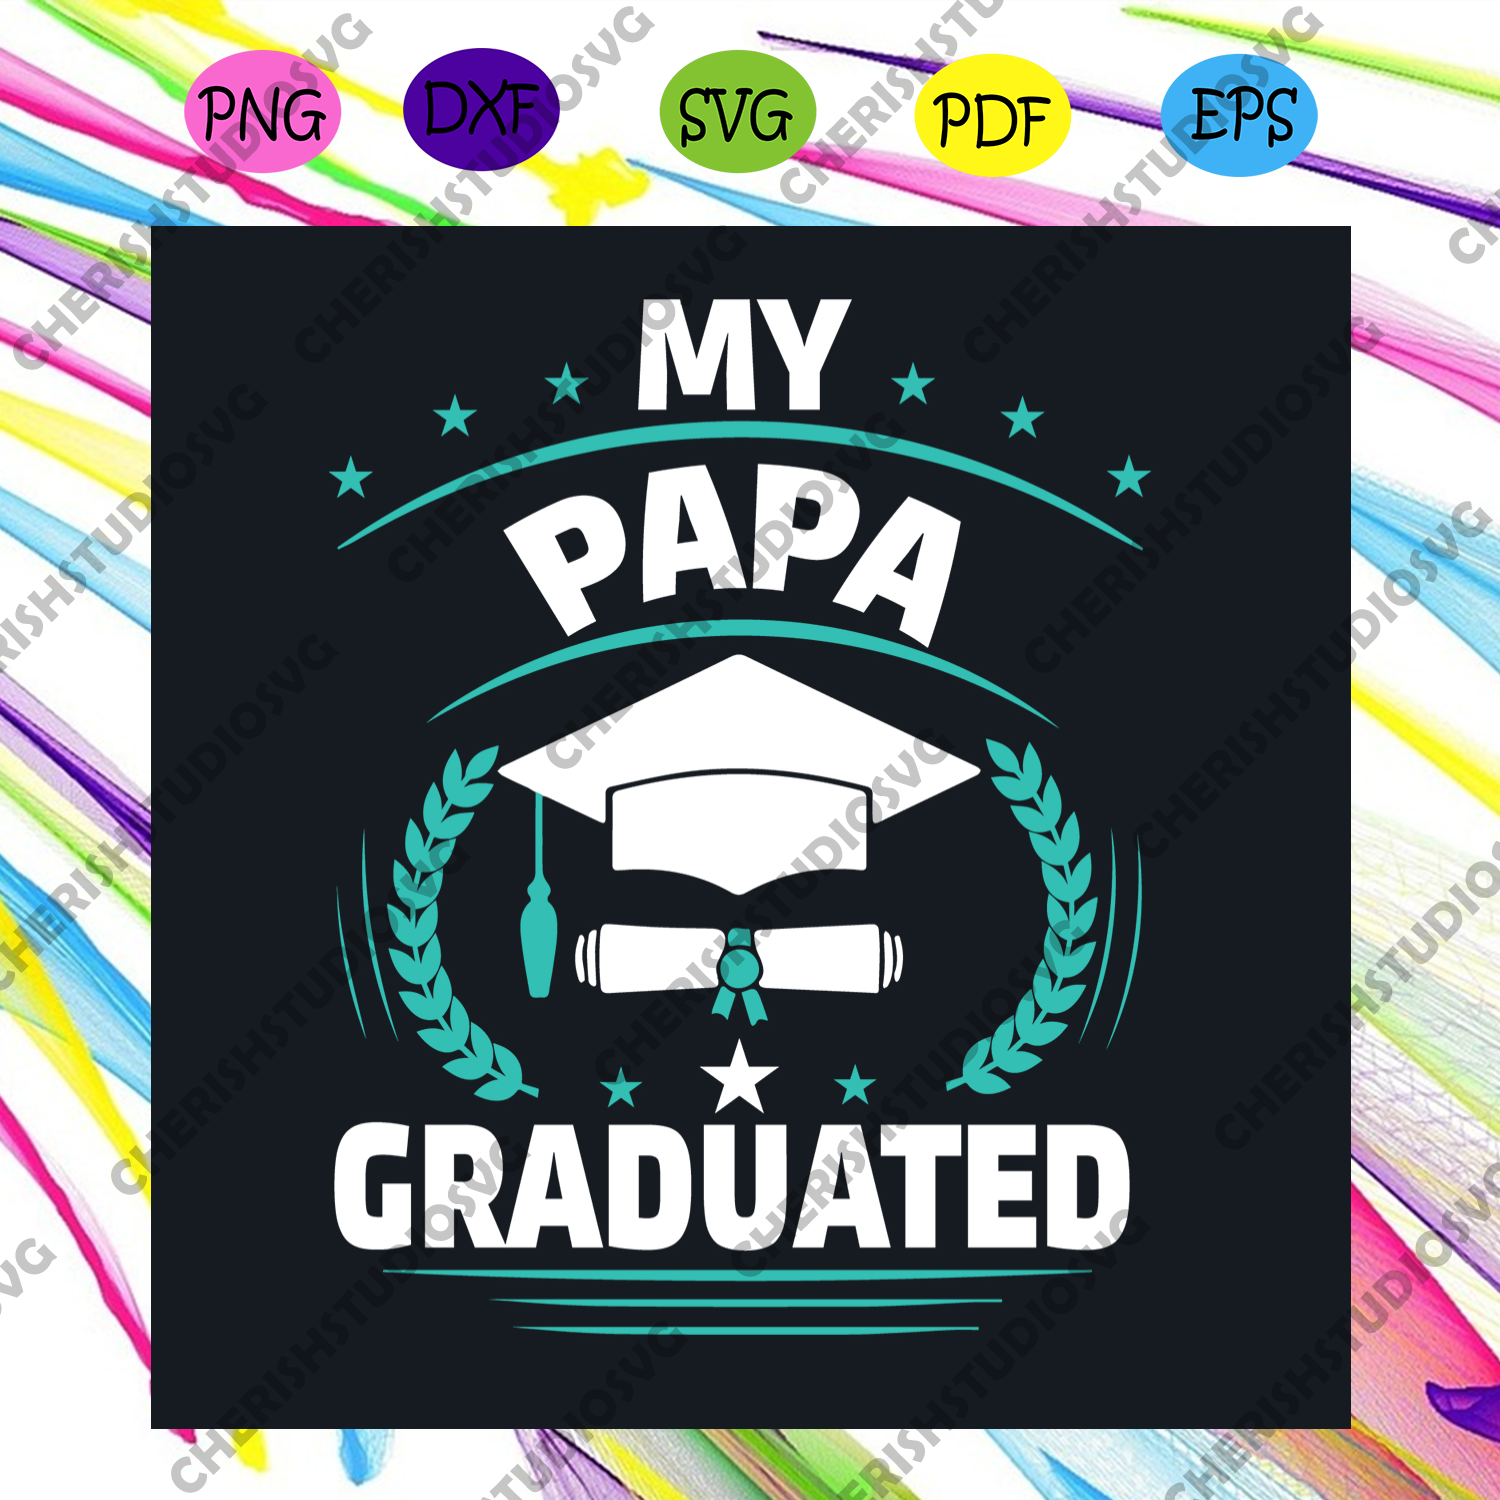 Download My Papa Graduated Svg Trending Svg My Papa Svg Graduated Svg Gradu Cherishsvgstudio